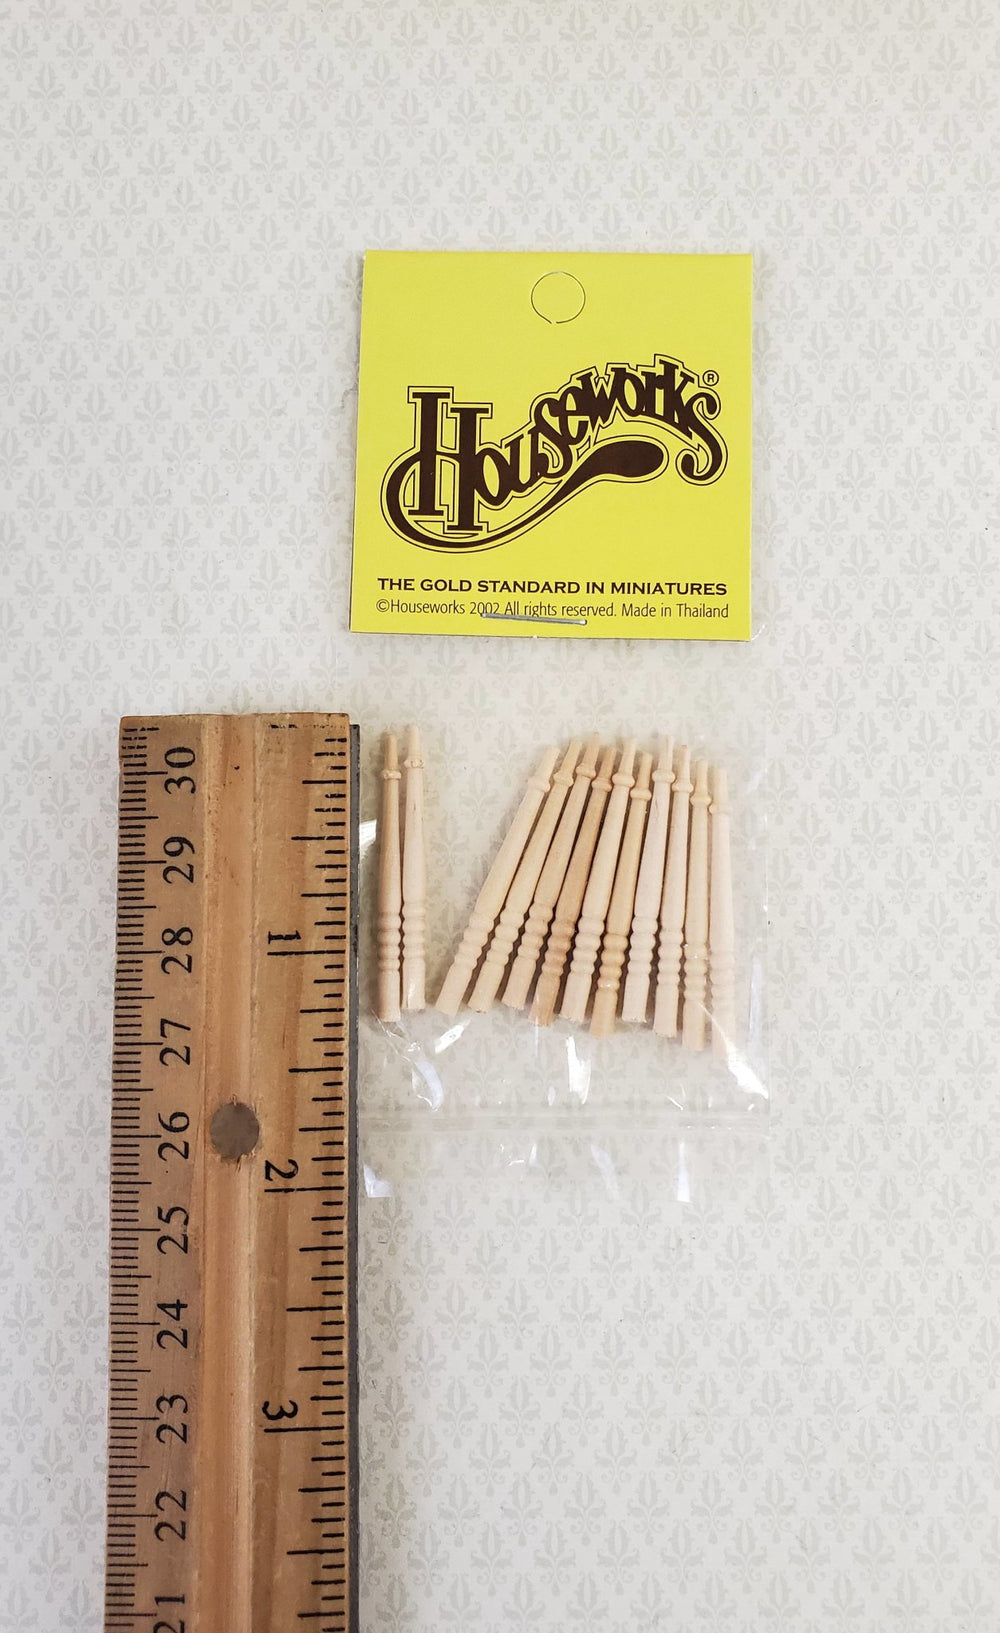 Dollhouse Miniature Spindles 1:24 HALF SCALE Stair or Porch 1 1/4" Set of 12 HWH7019 - Miniature Crush